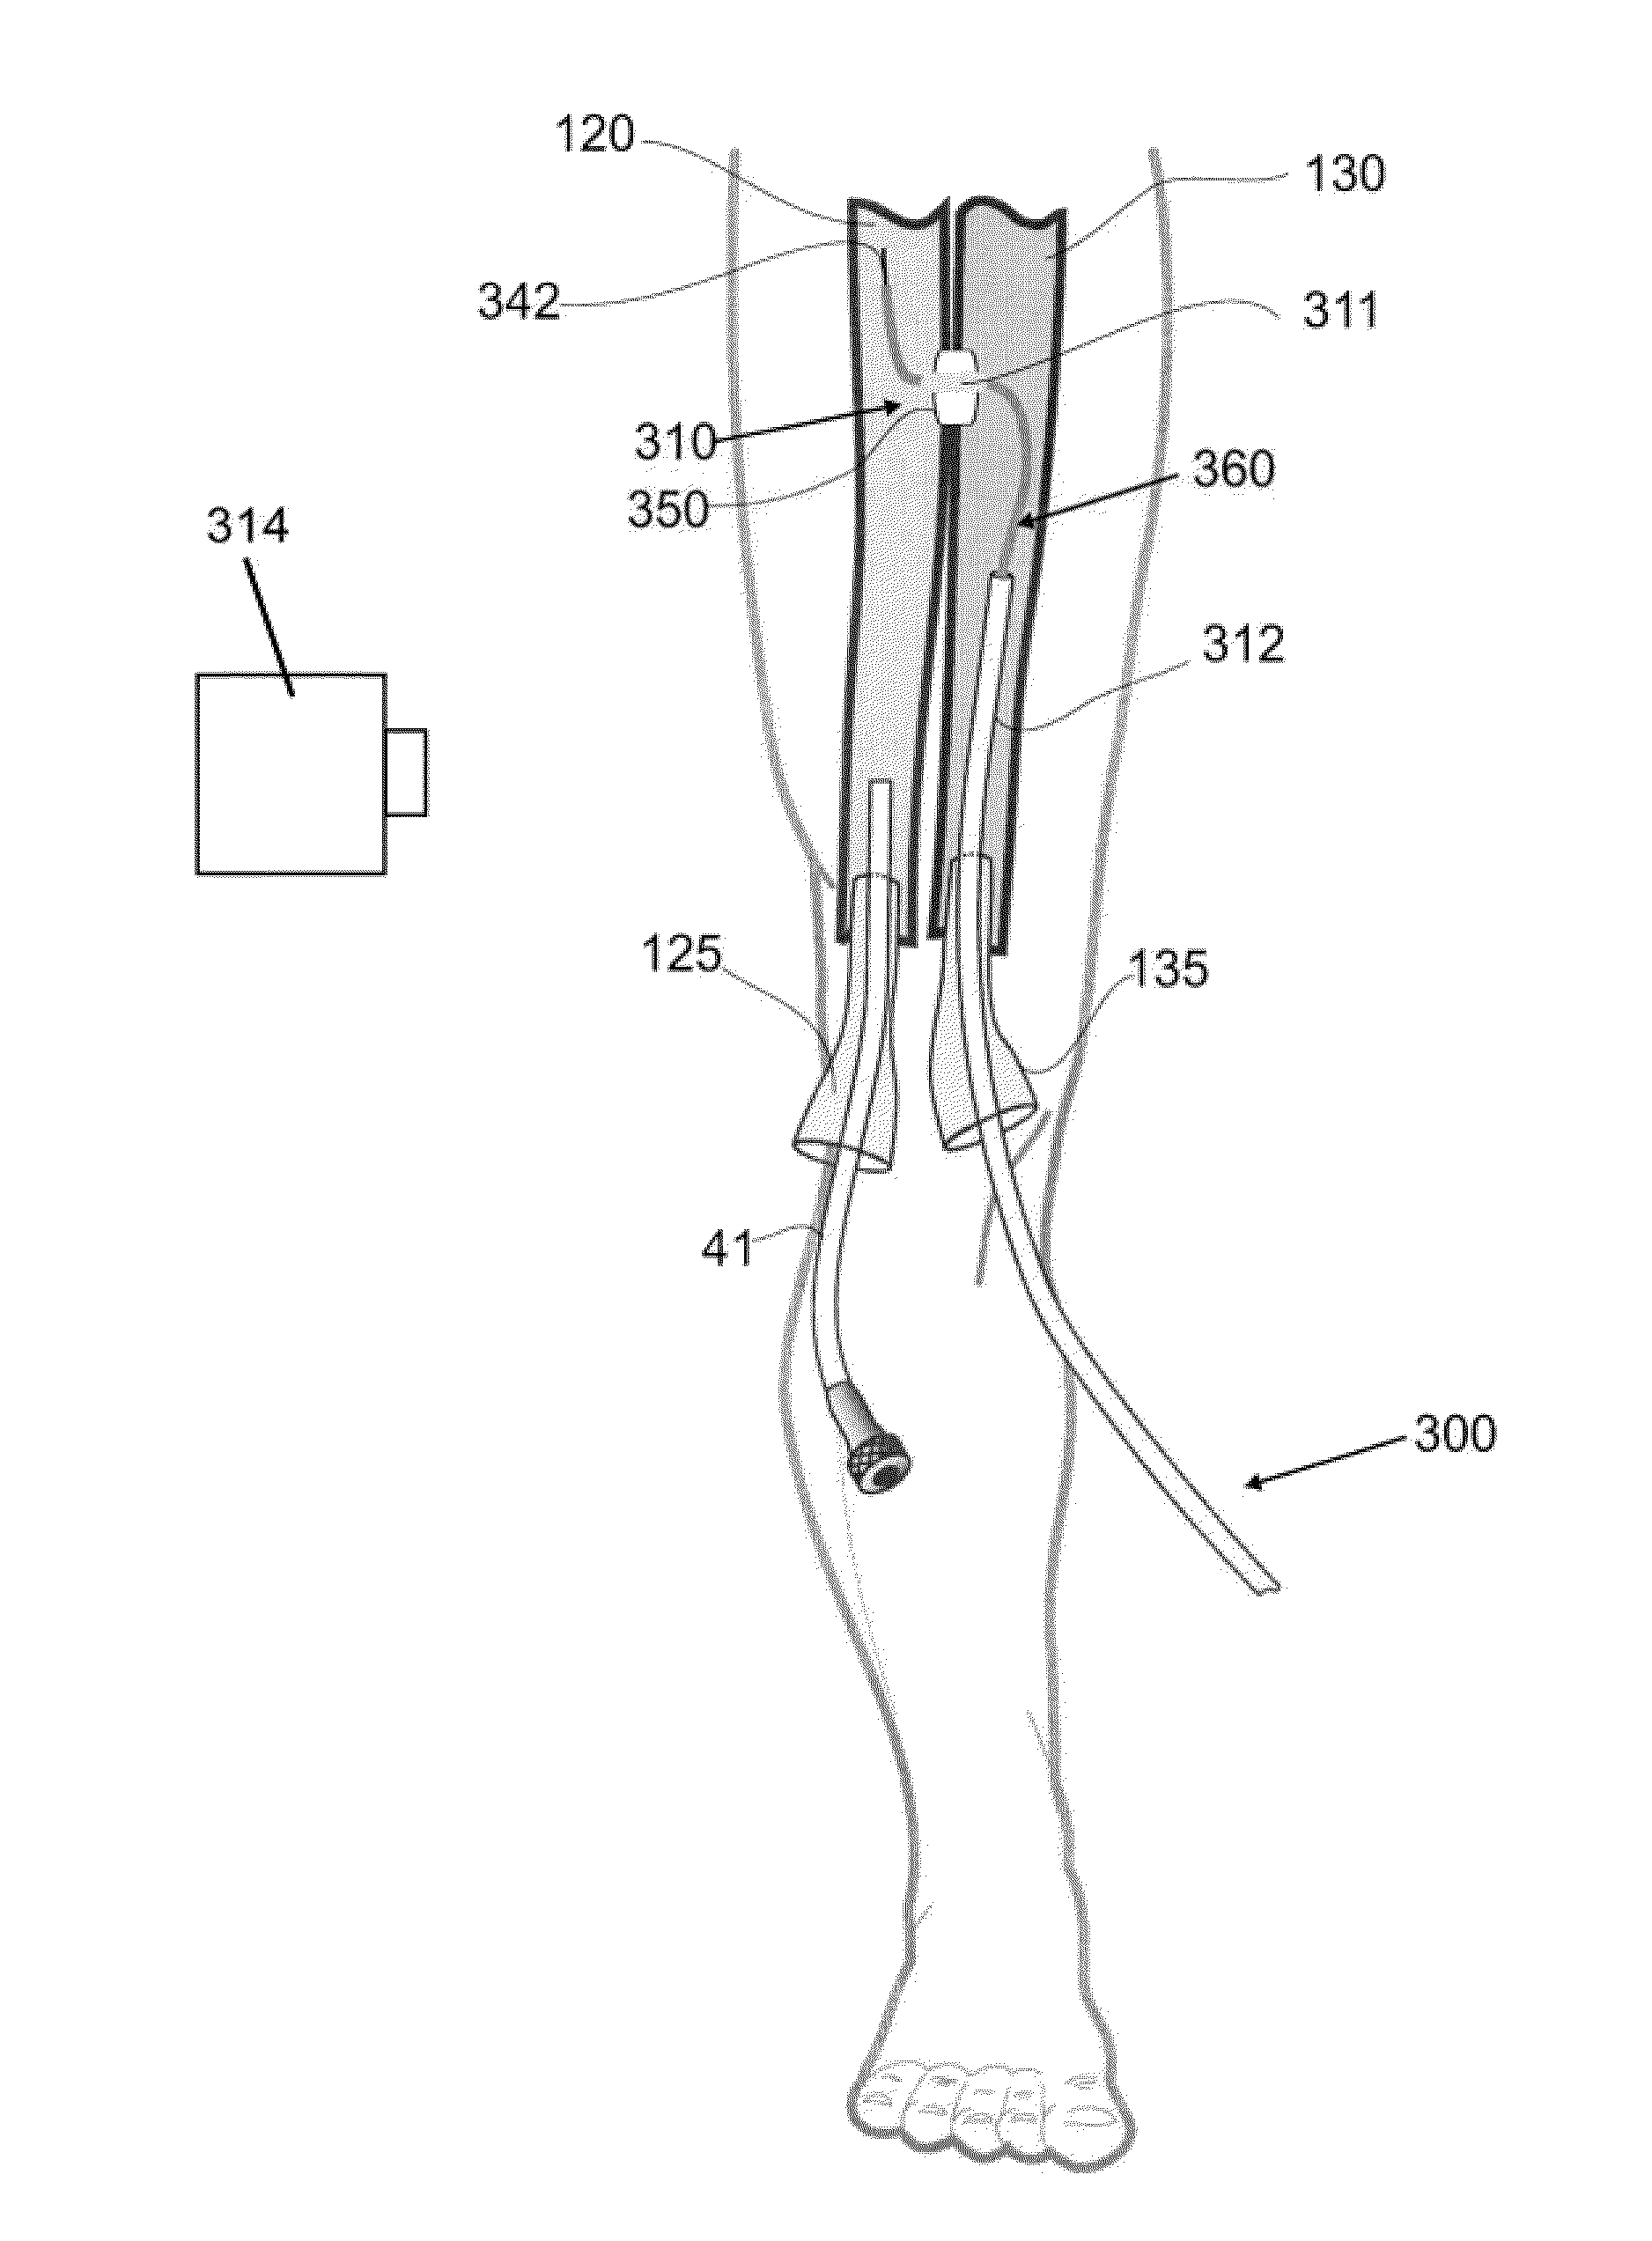 Devices, systems, and methods for peripheral arteriovenous fistula creation